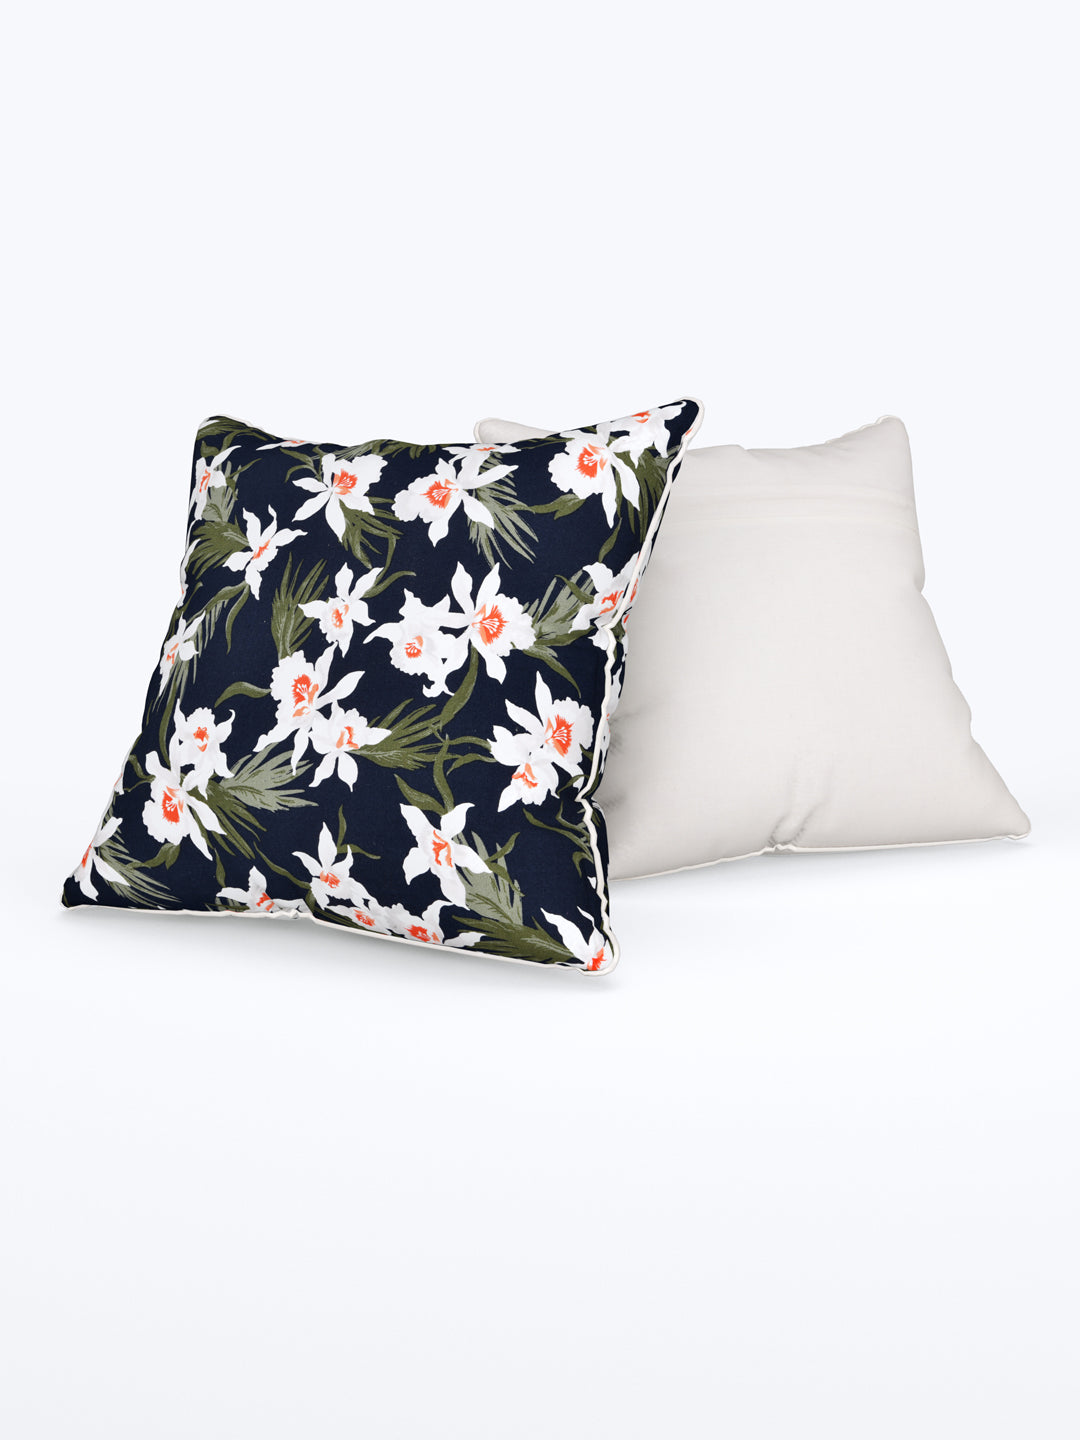 Cushion Cover Set Of 5; White Flowers